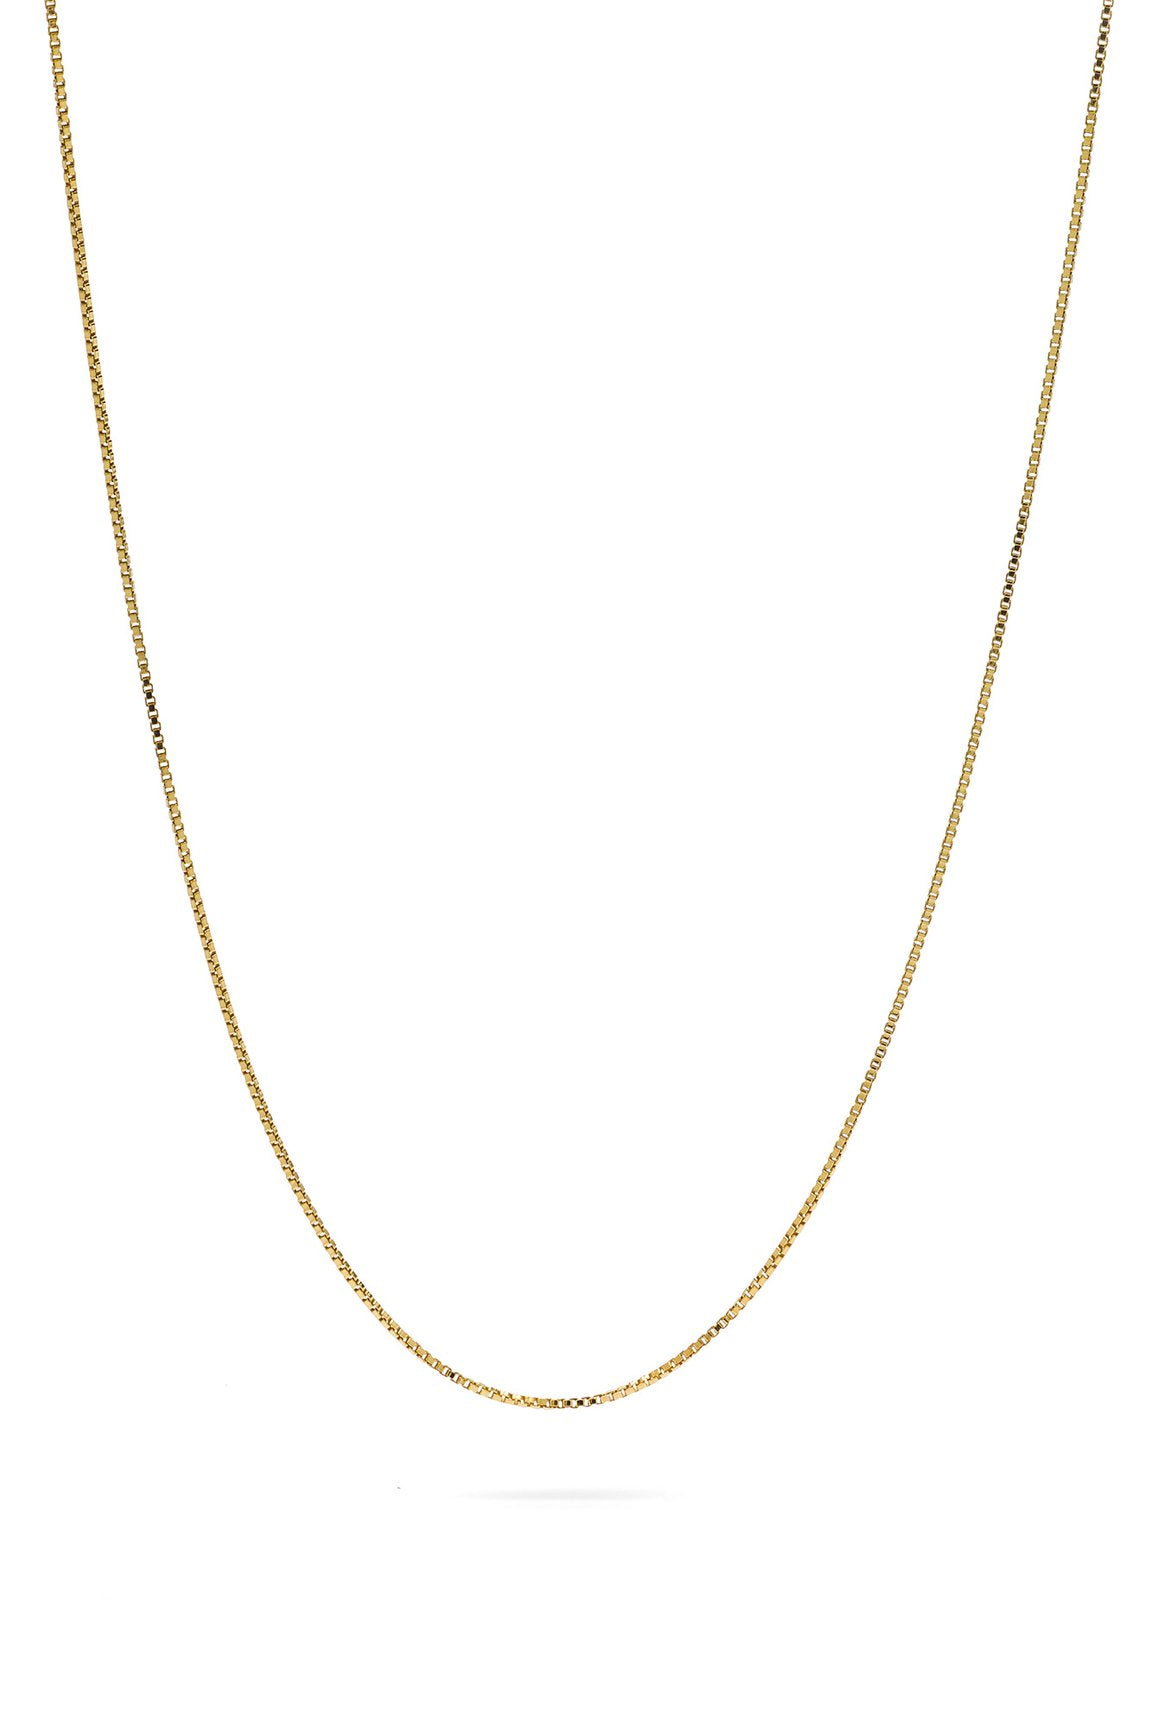 LONG SMOOTH NECKLACE IN GOLD - BEYOND STUDIOS